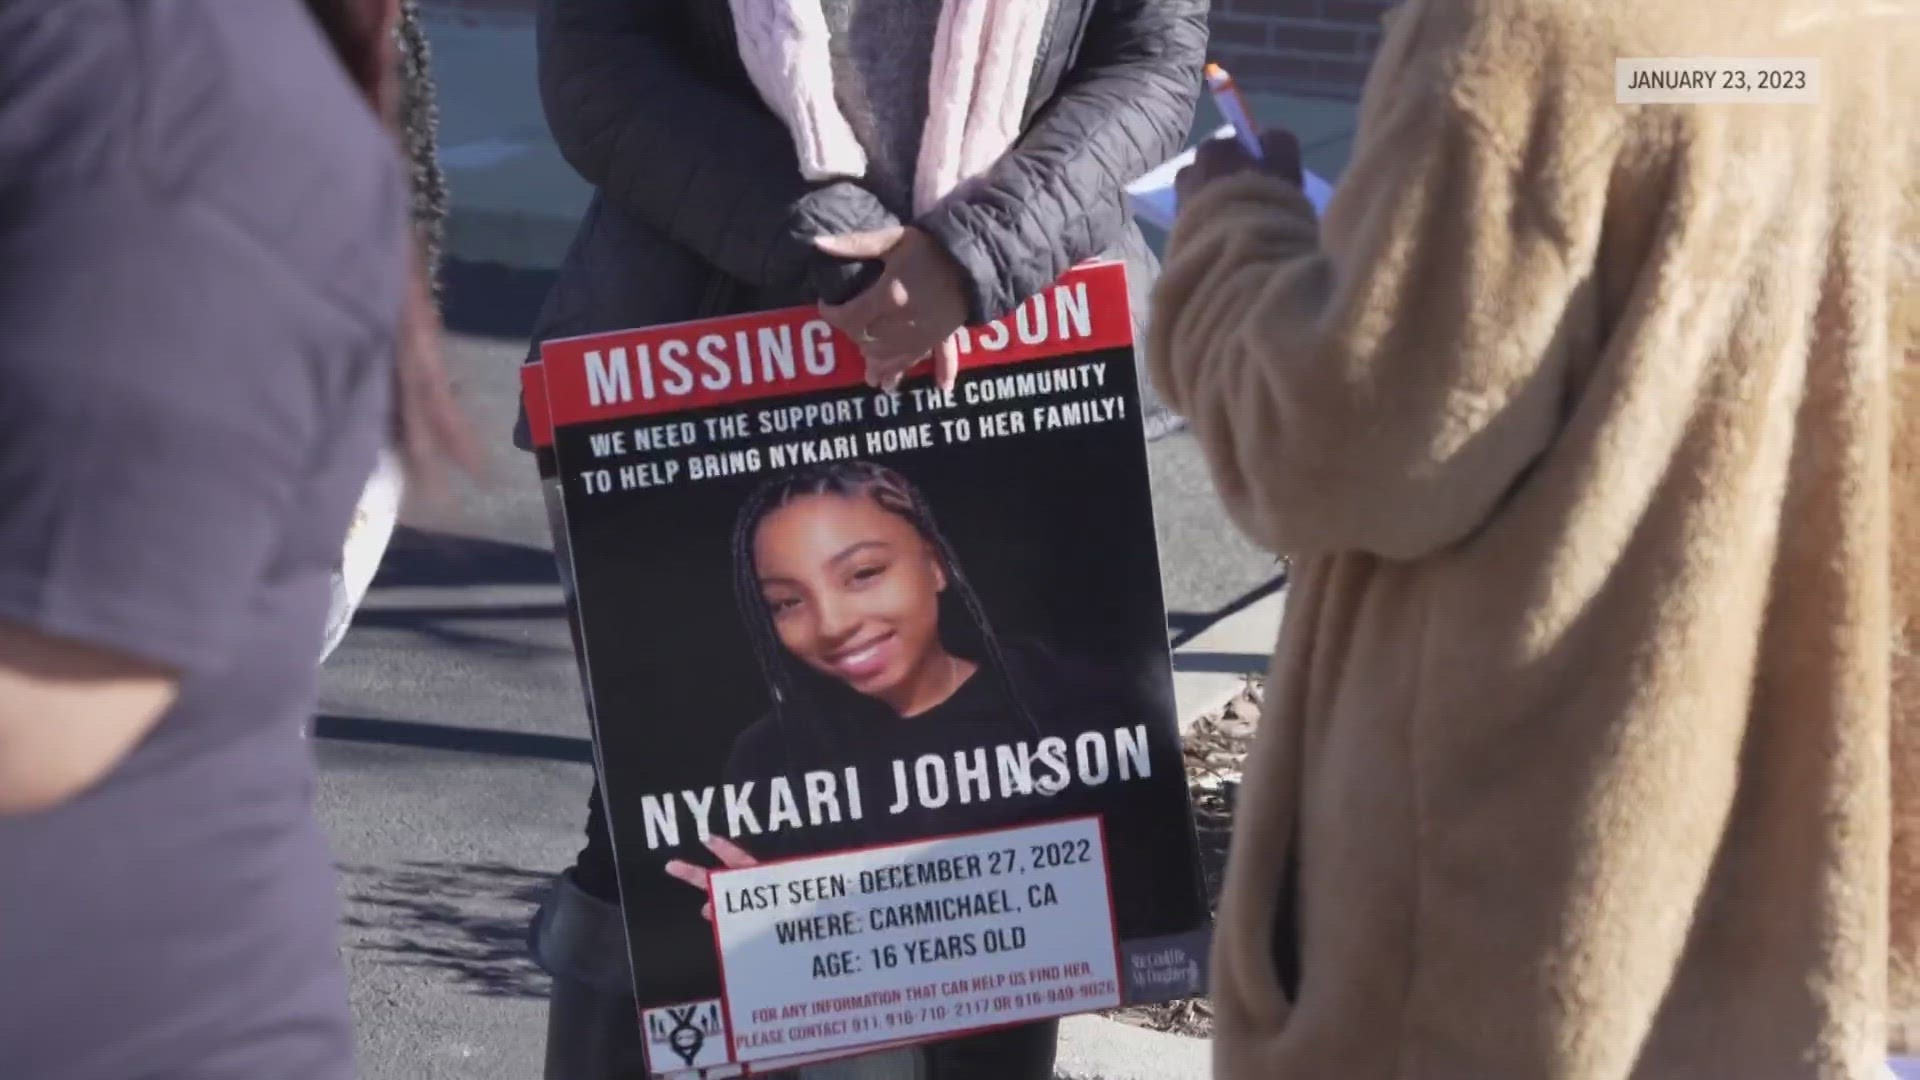 The Black and Missing Foundation says Black people make up nearly 40% of reported missing persons in the U.S. But they only account for 13% of the population.